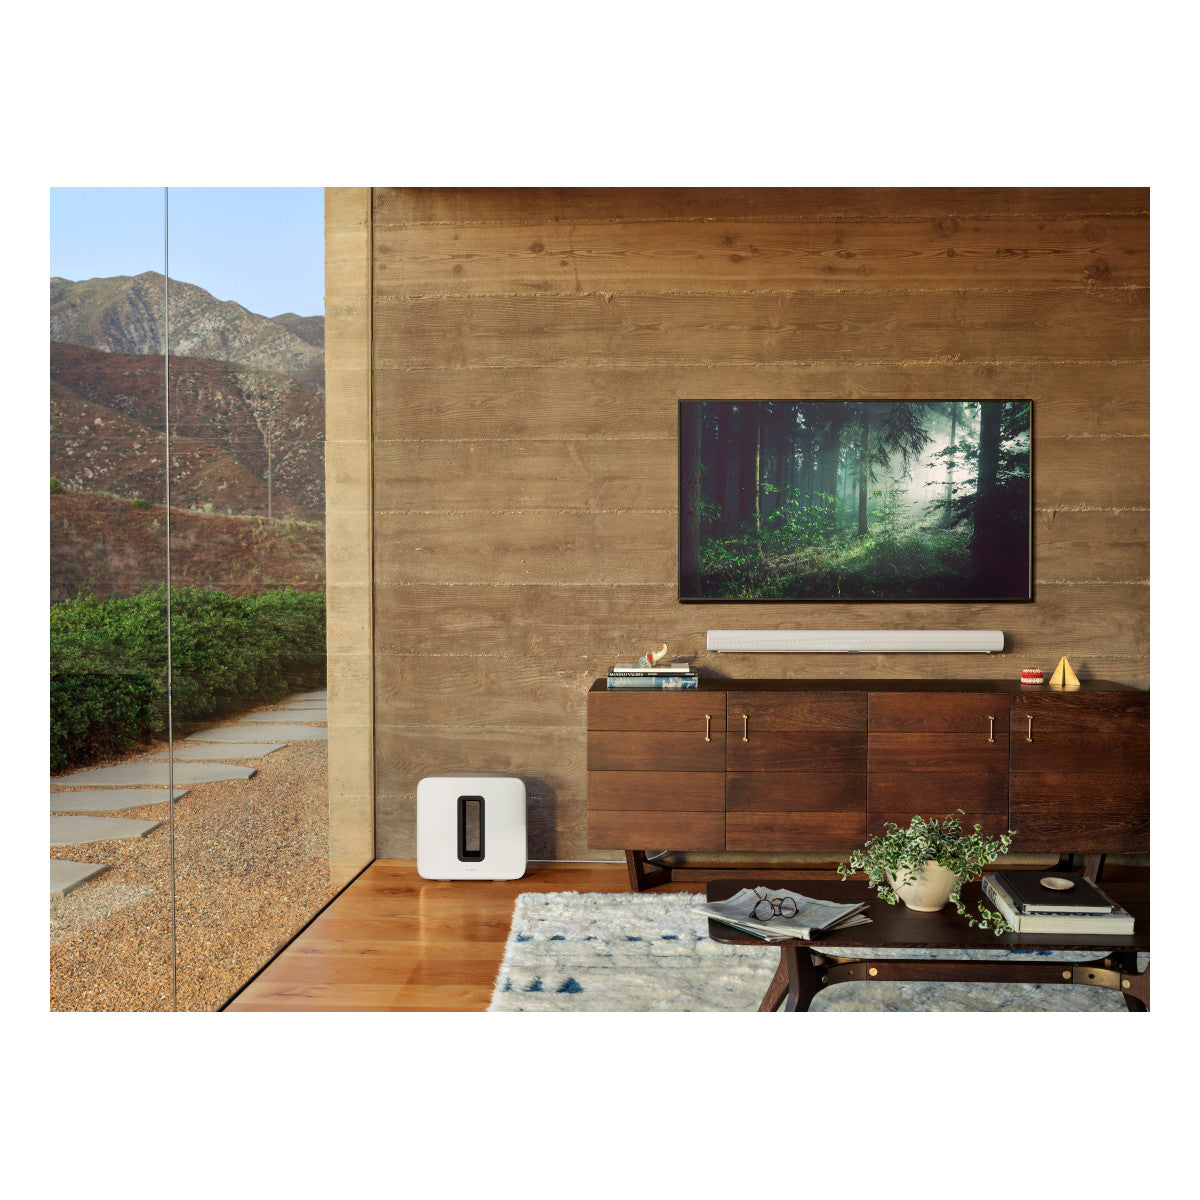 Sonos Surround Set with Arc Wireless Dolby Atmos Sound Bar, Subwoofer, and One Pair of Gen 2 One Speakers (White)